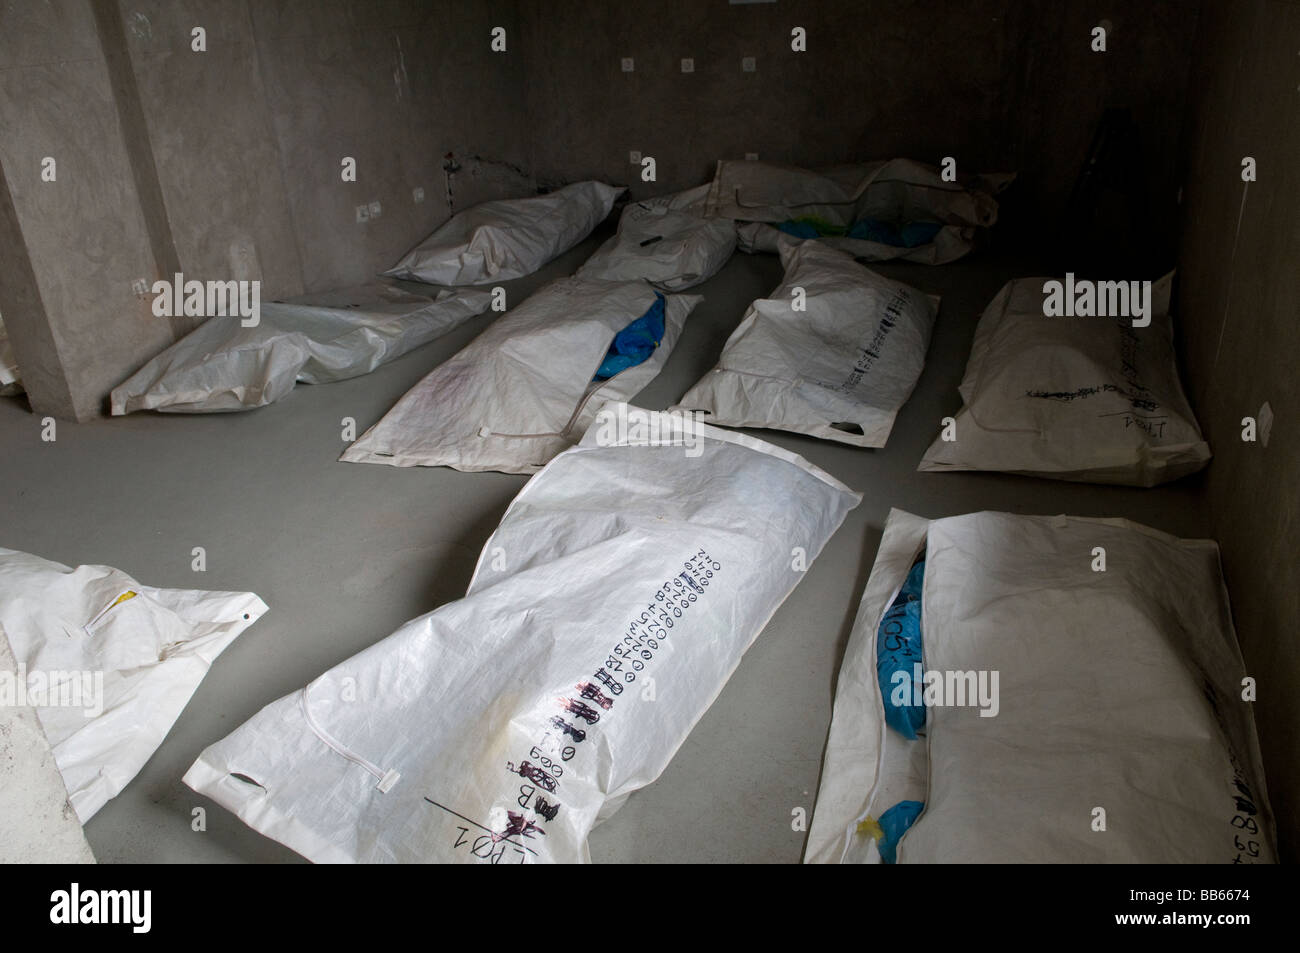 Remains of human bodies at the mortuary facility of ICMP for identifications of missing persons from the Bosnian war in the town of Tuzla, Bosnia Stock Photo